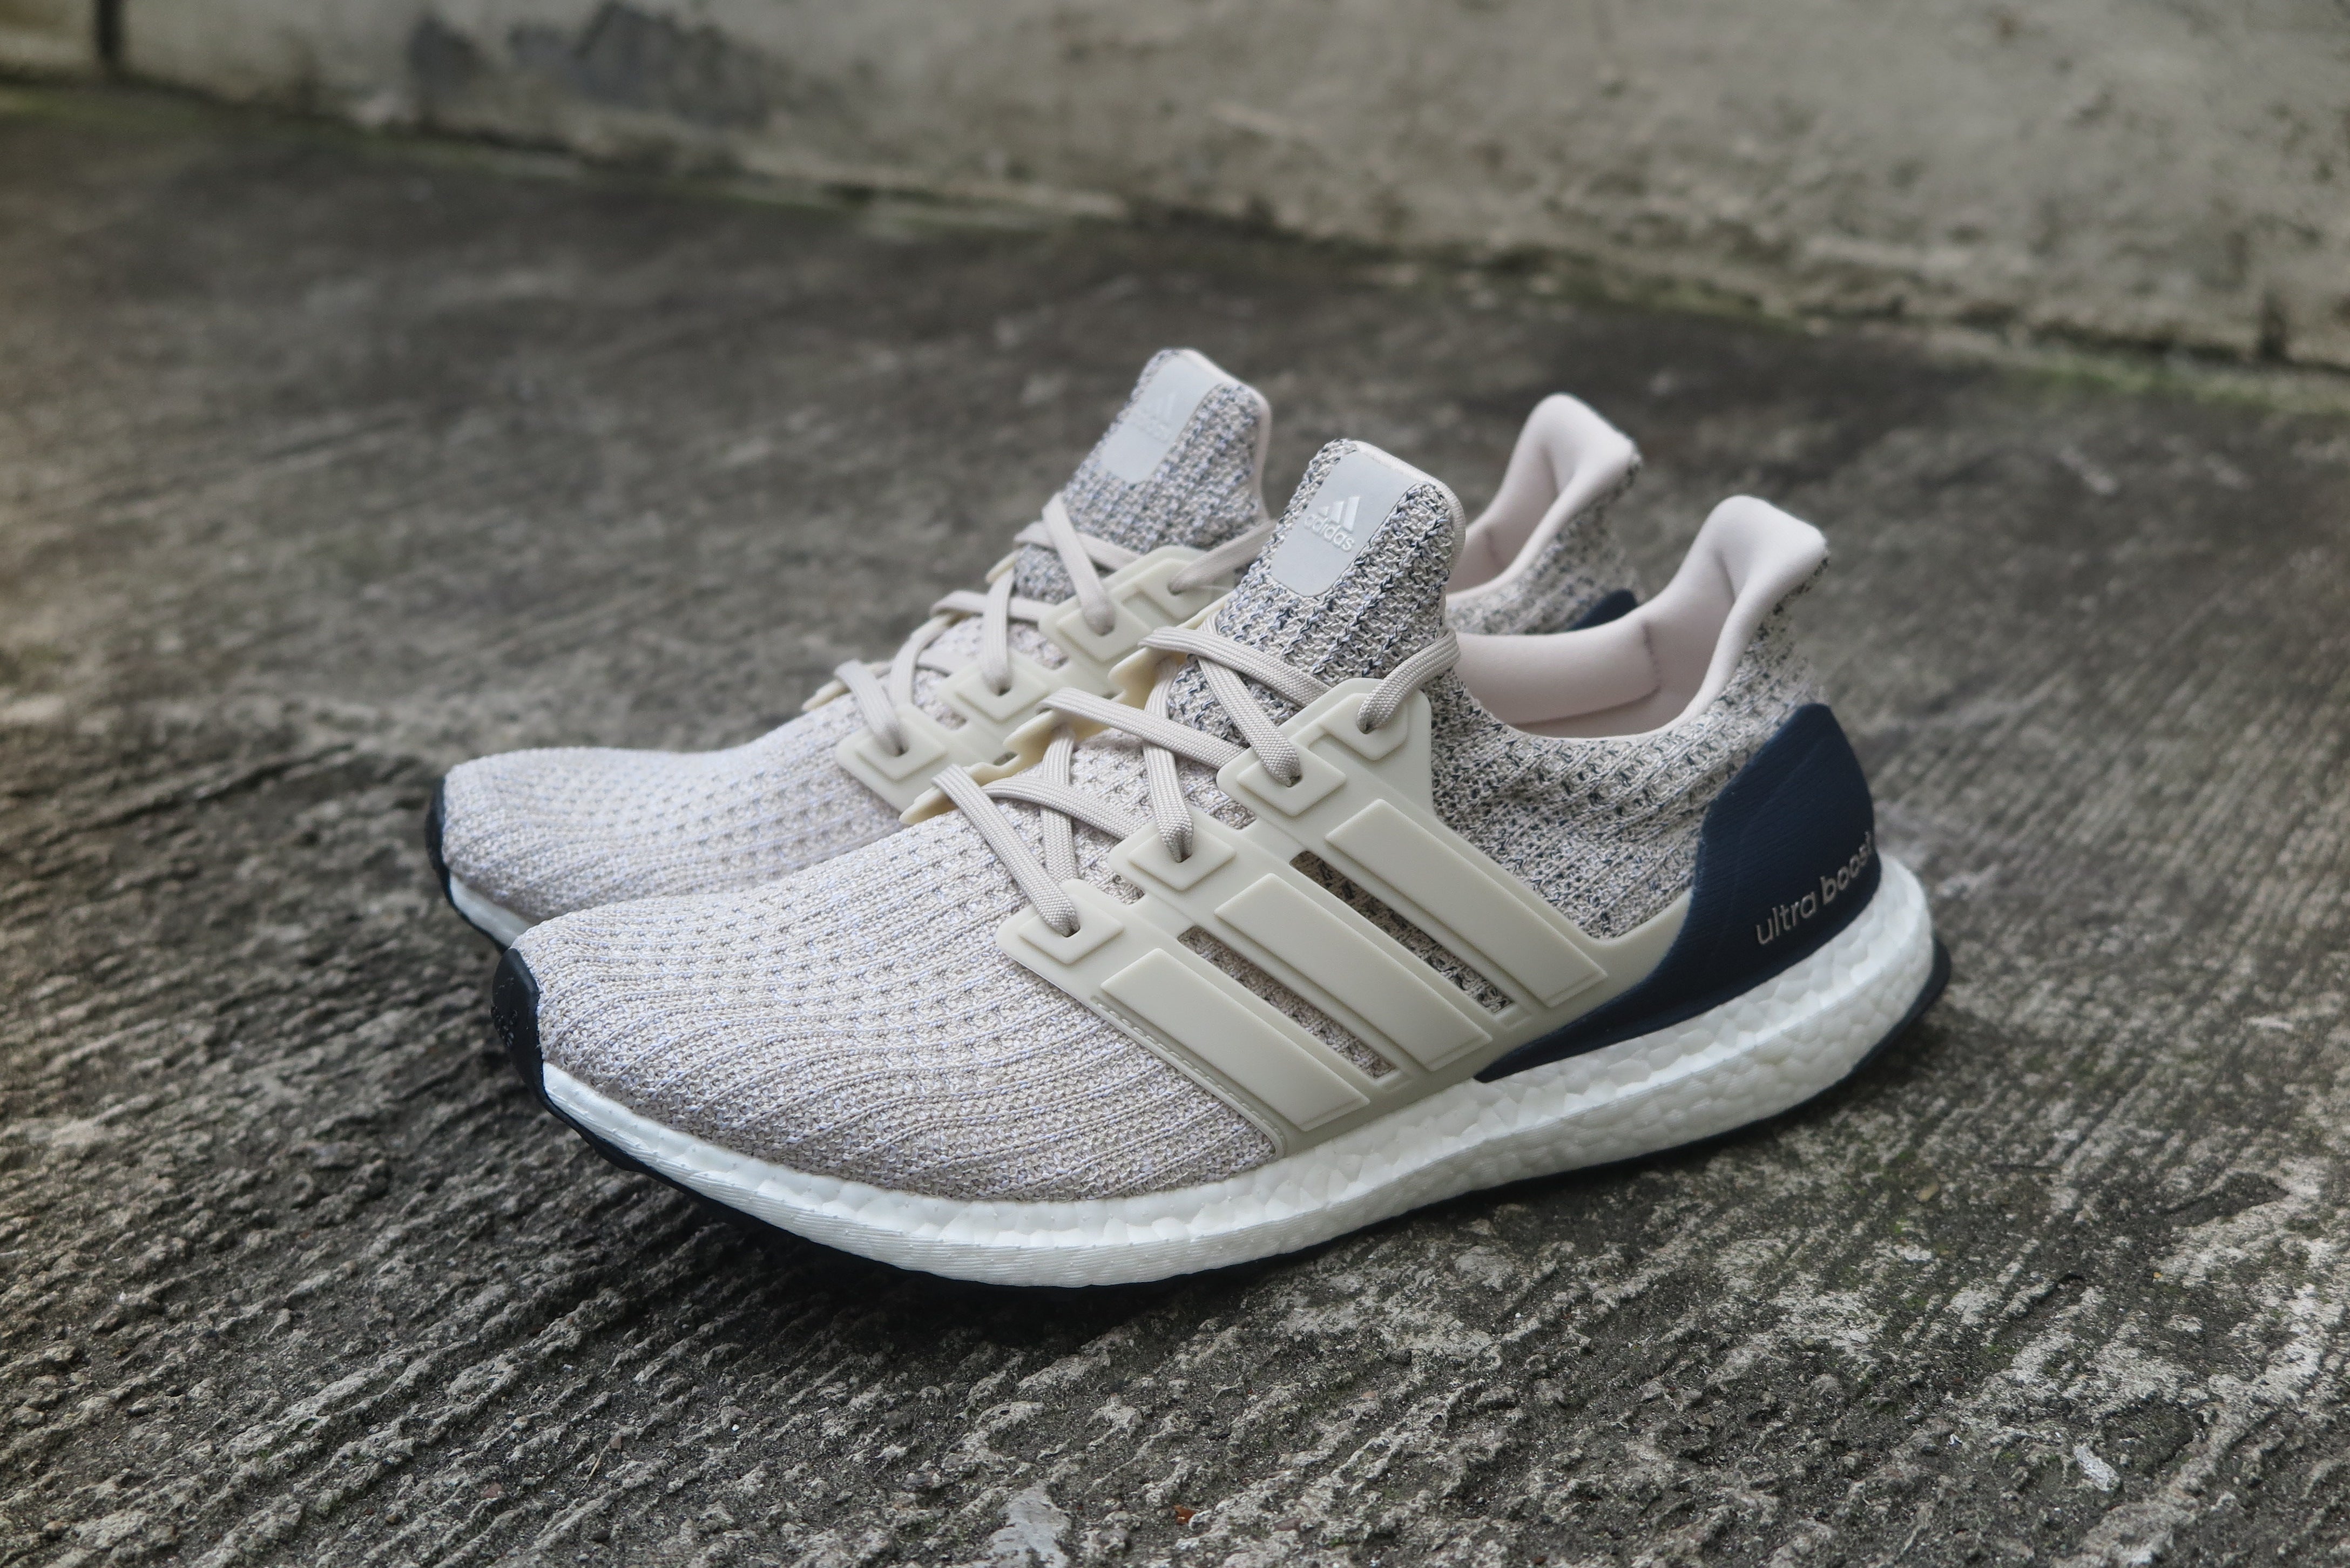 Parley adidas Ultra Boost BB7076 Top Insole 